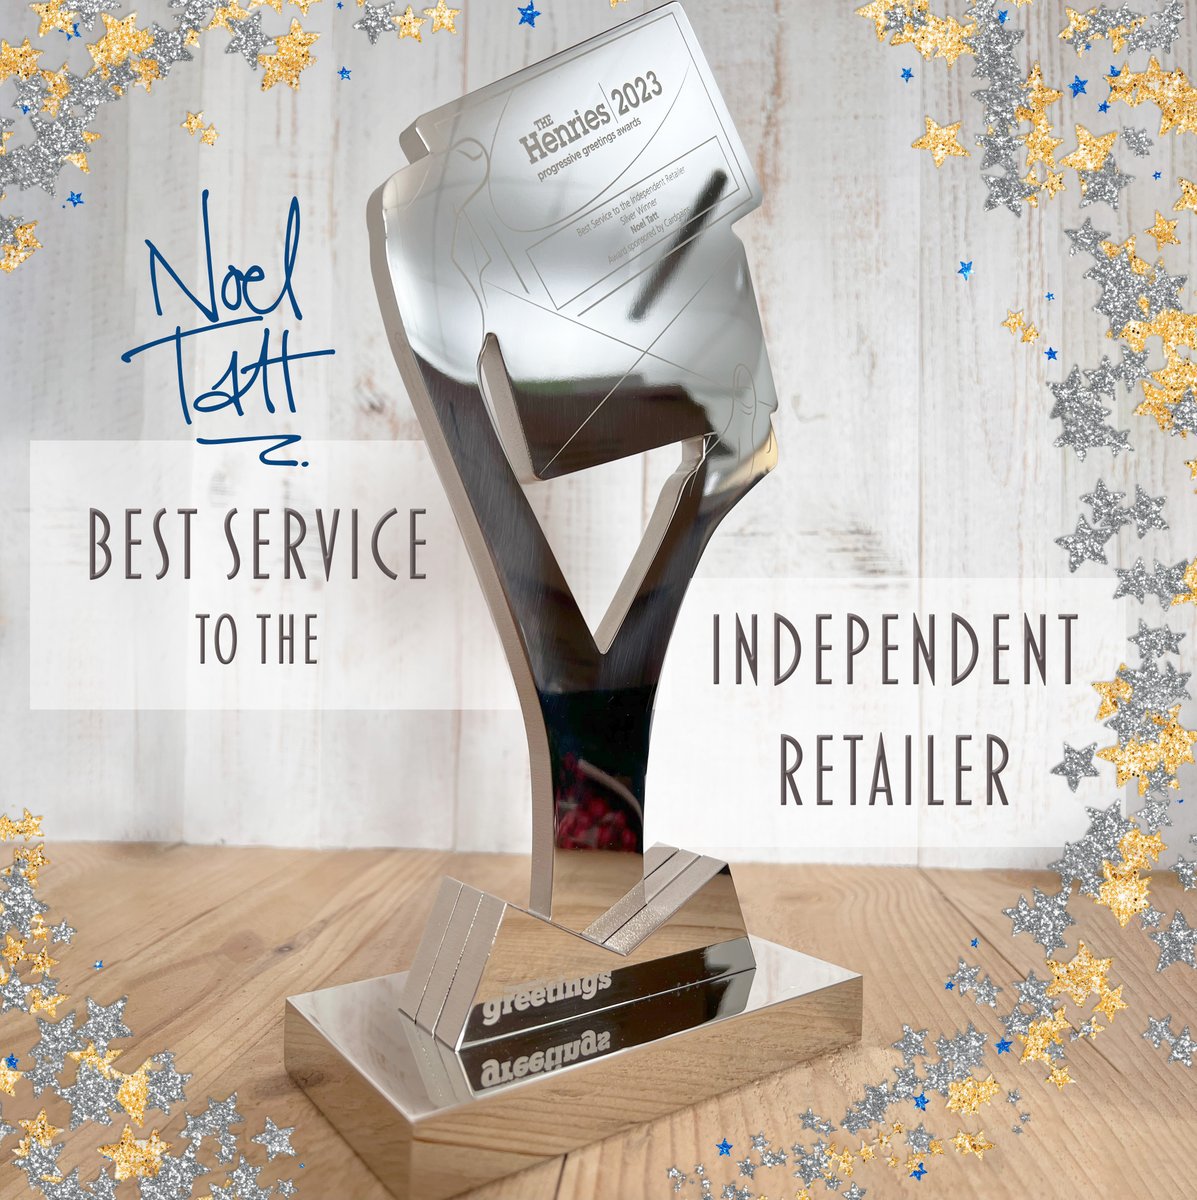 We're so pleased to have won the Henries Silver Award for Best Service to the Independent Retailer last night! ✨ Sending a massive thank you to all who voted for us, we couldn't have done it without you! 💕 #HenriesAwards2023 #BestService #greetingcards #NoelTattGroup